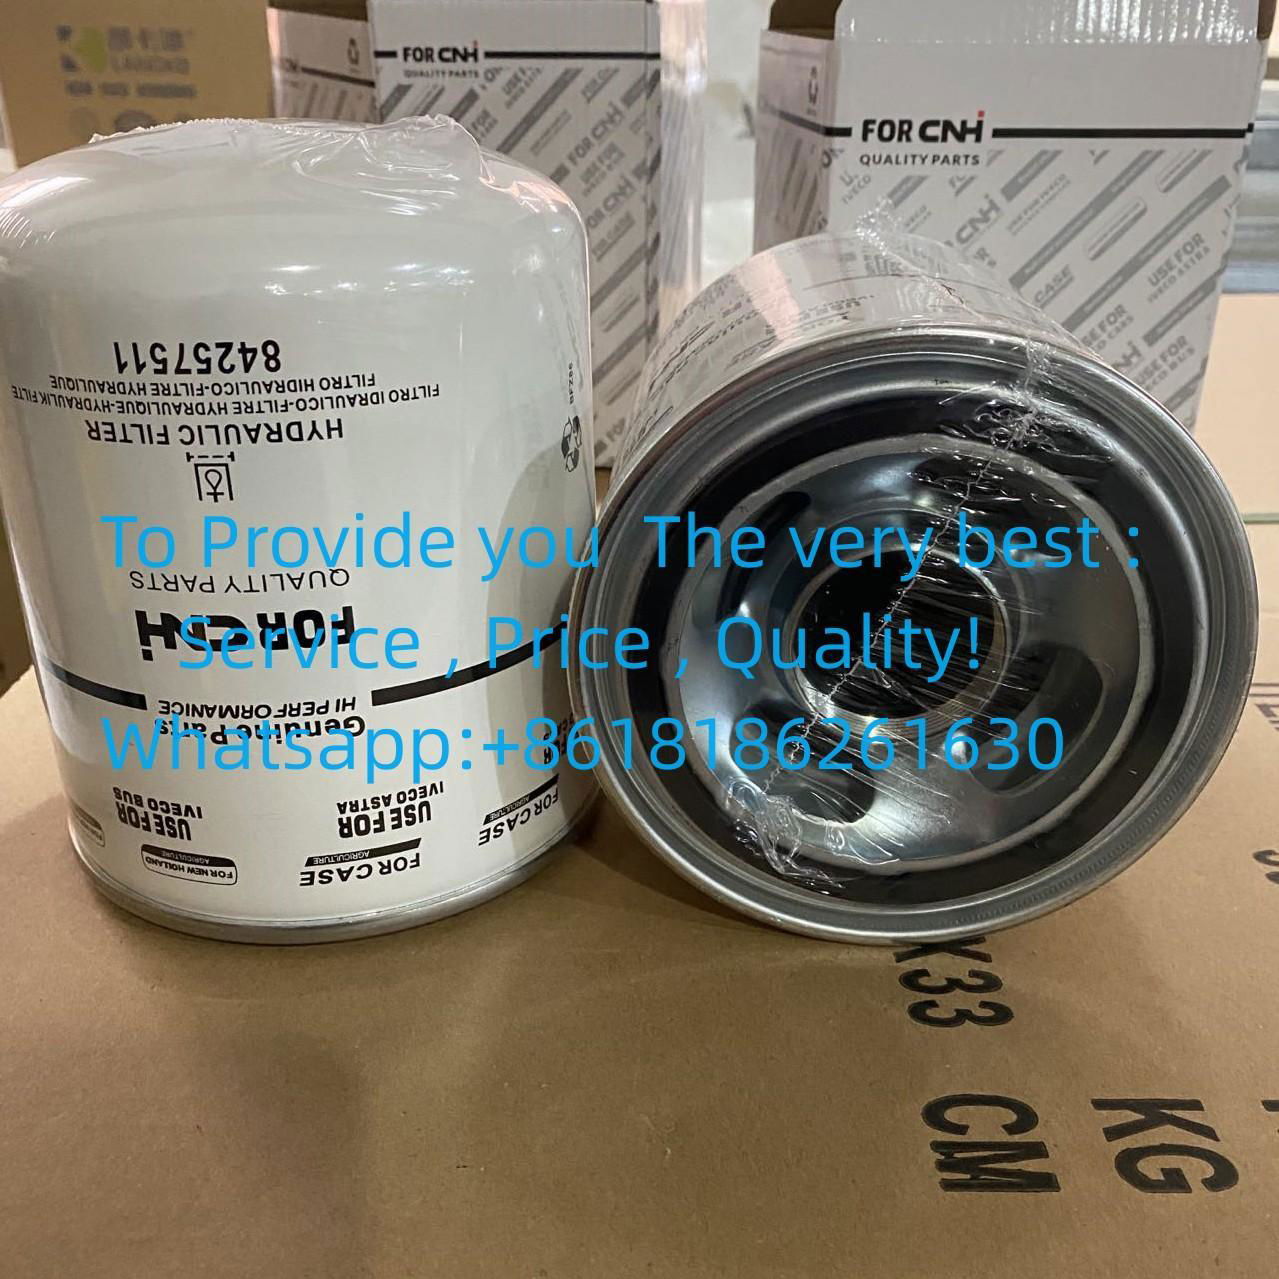 FILONG FILTER Hydraulic oil filter uses for case tractor Case 84257511; Donaldson P765662; Mann & Hummel W14005, 5174044 47131196 8012300 HF29117 84257511 , 82824884 P765662 BT23555-MPG 47131195 84168722 84257511 SH86002